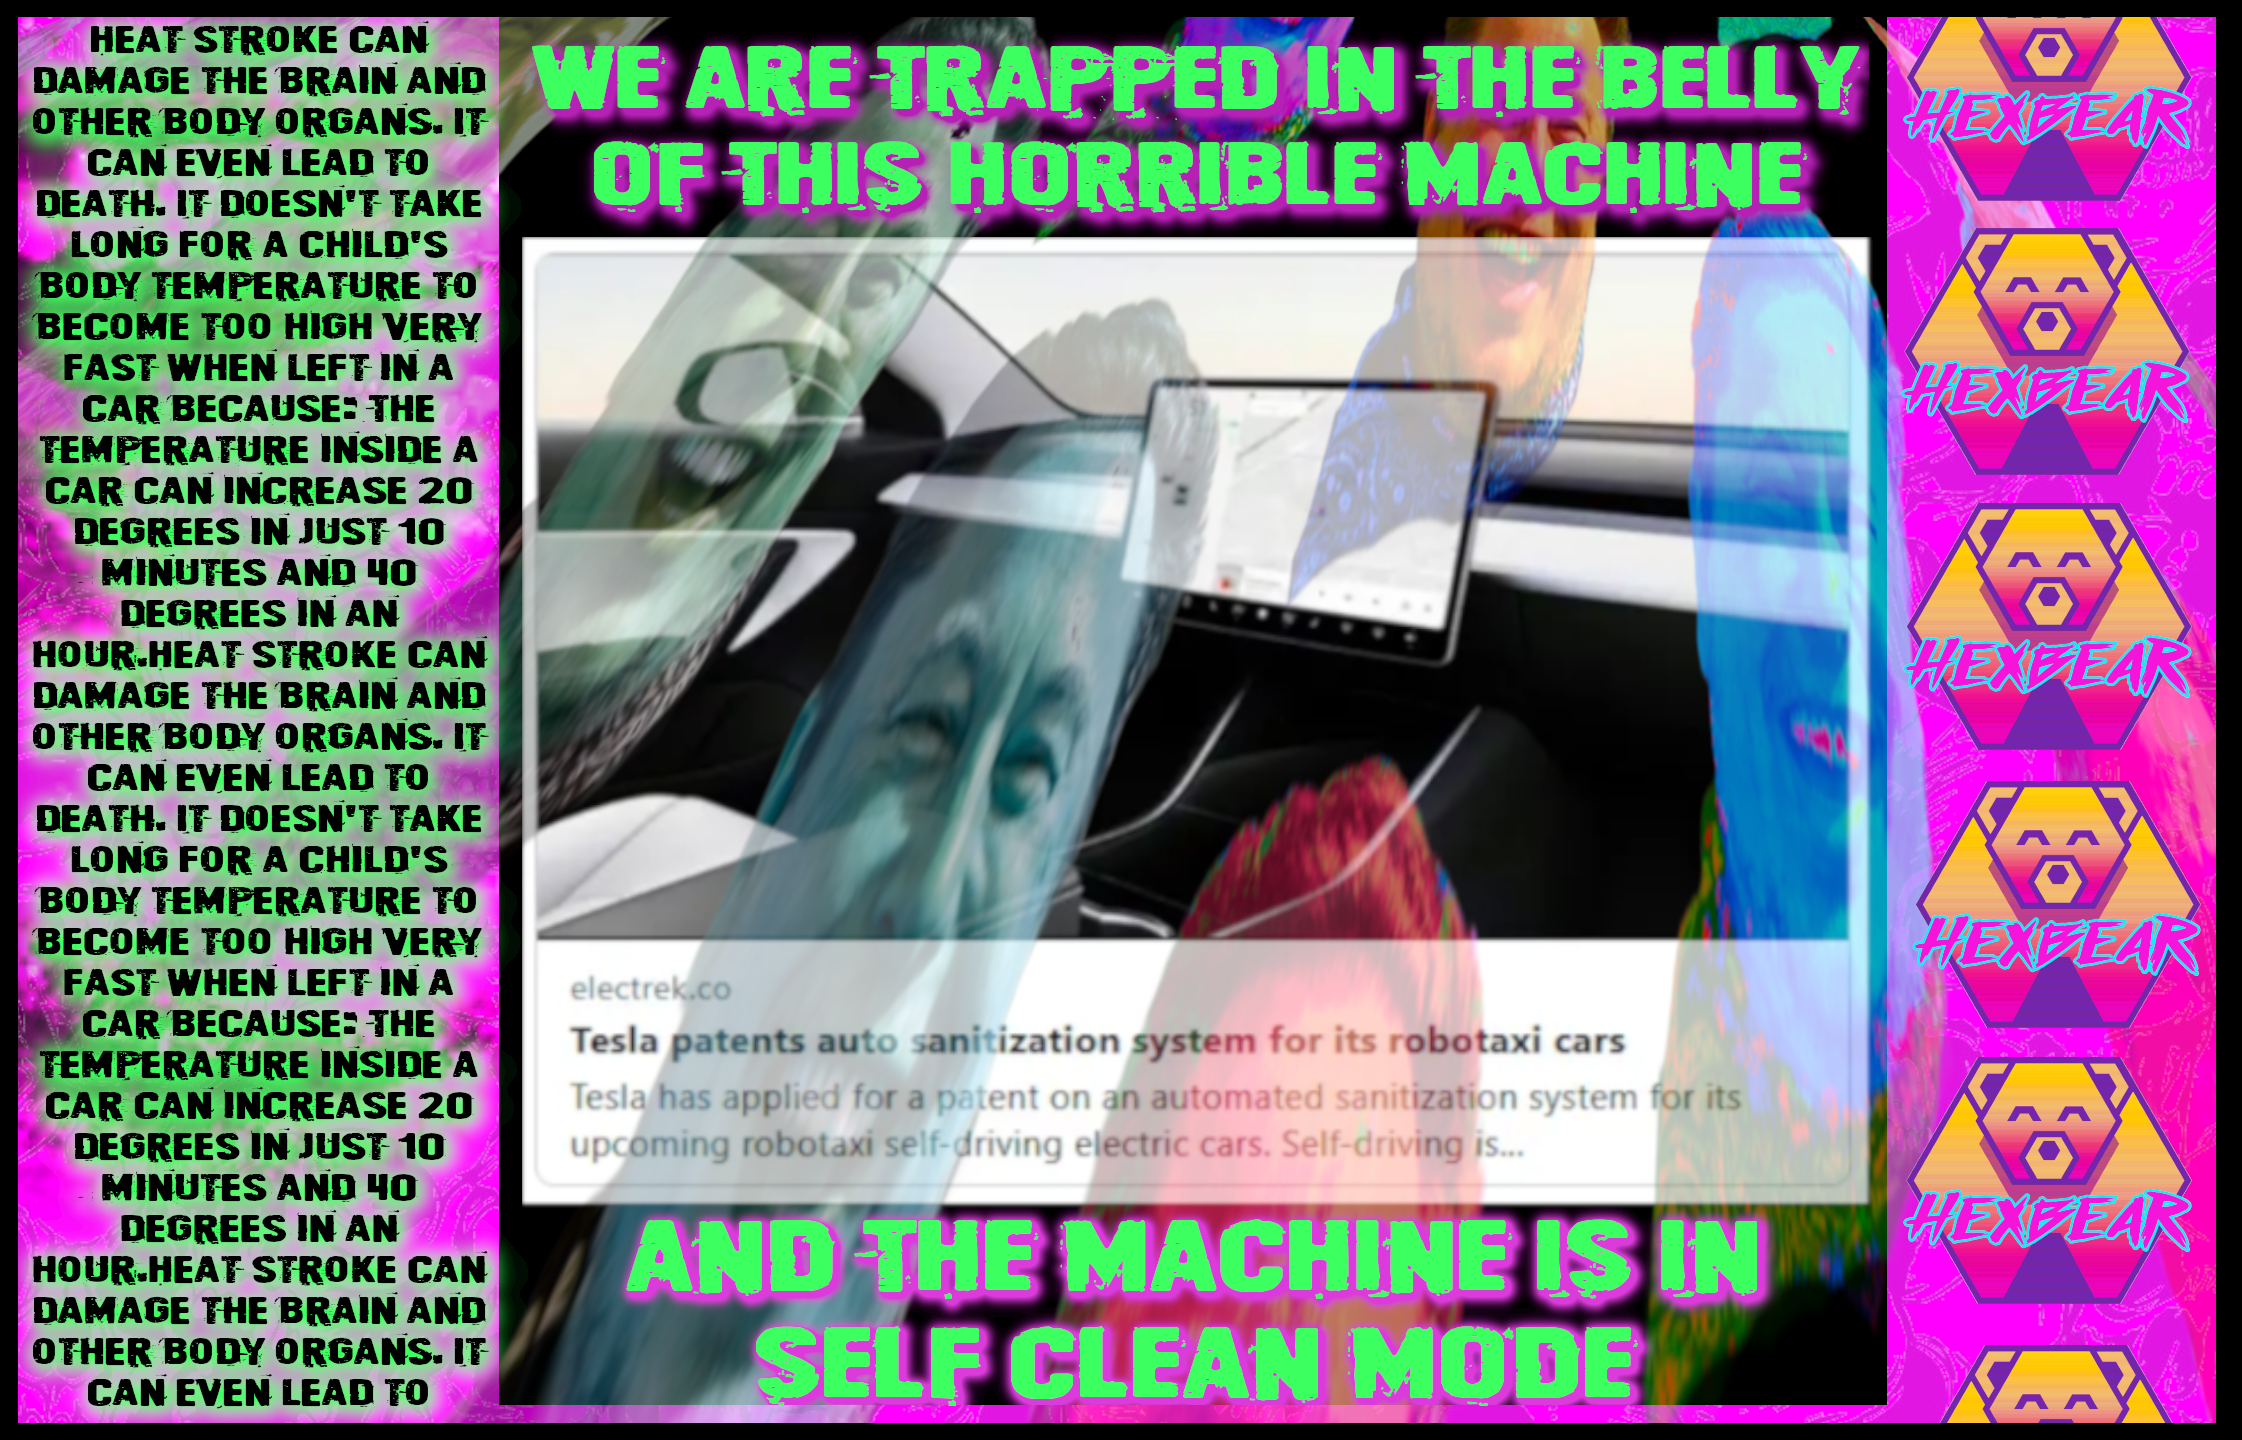 A psychedalic blend of painful colors is overlaid on a news blurb about tesla robotaxis having a "auto sanitization mode" using head and UVC light. On the left of the image there is a distorted blurb explaining the dangers of leaving a child in a hot car. Framing the image are the words "We are trapped in the belly of this horrible machine and the machine is in self clean mode". The right side of the image has a line of hexbear logos. Overlaid on all this are distorted, brightly colored images of Elon's sinister neckbeard smile. 